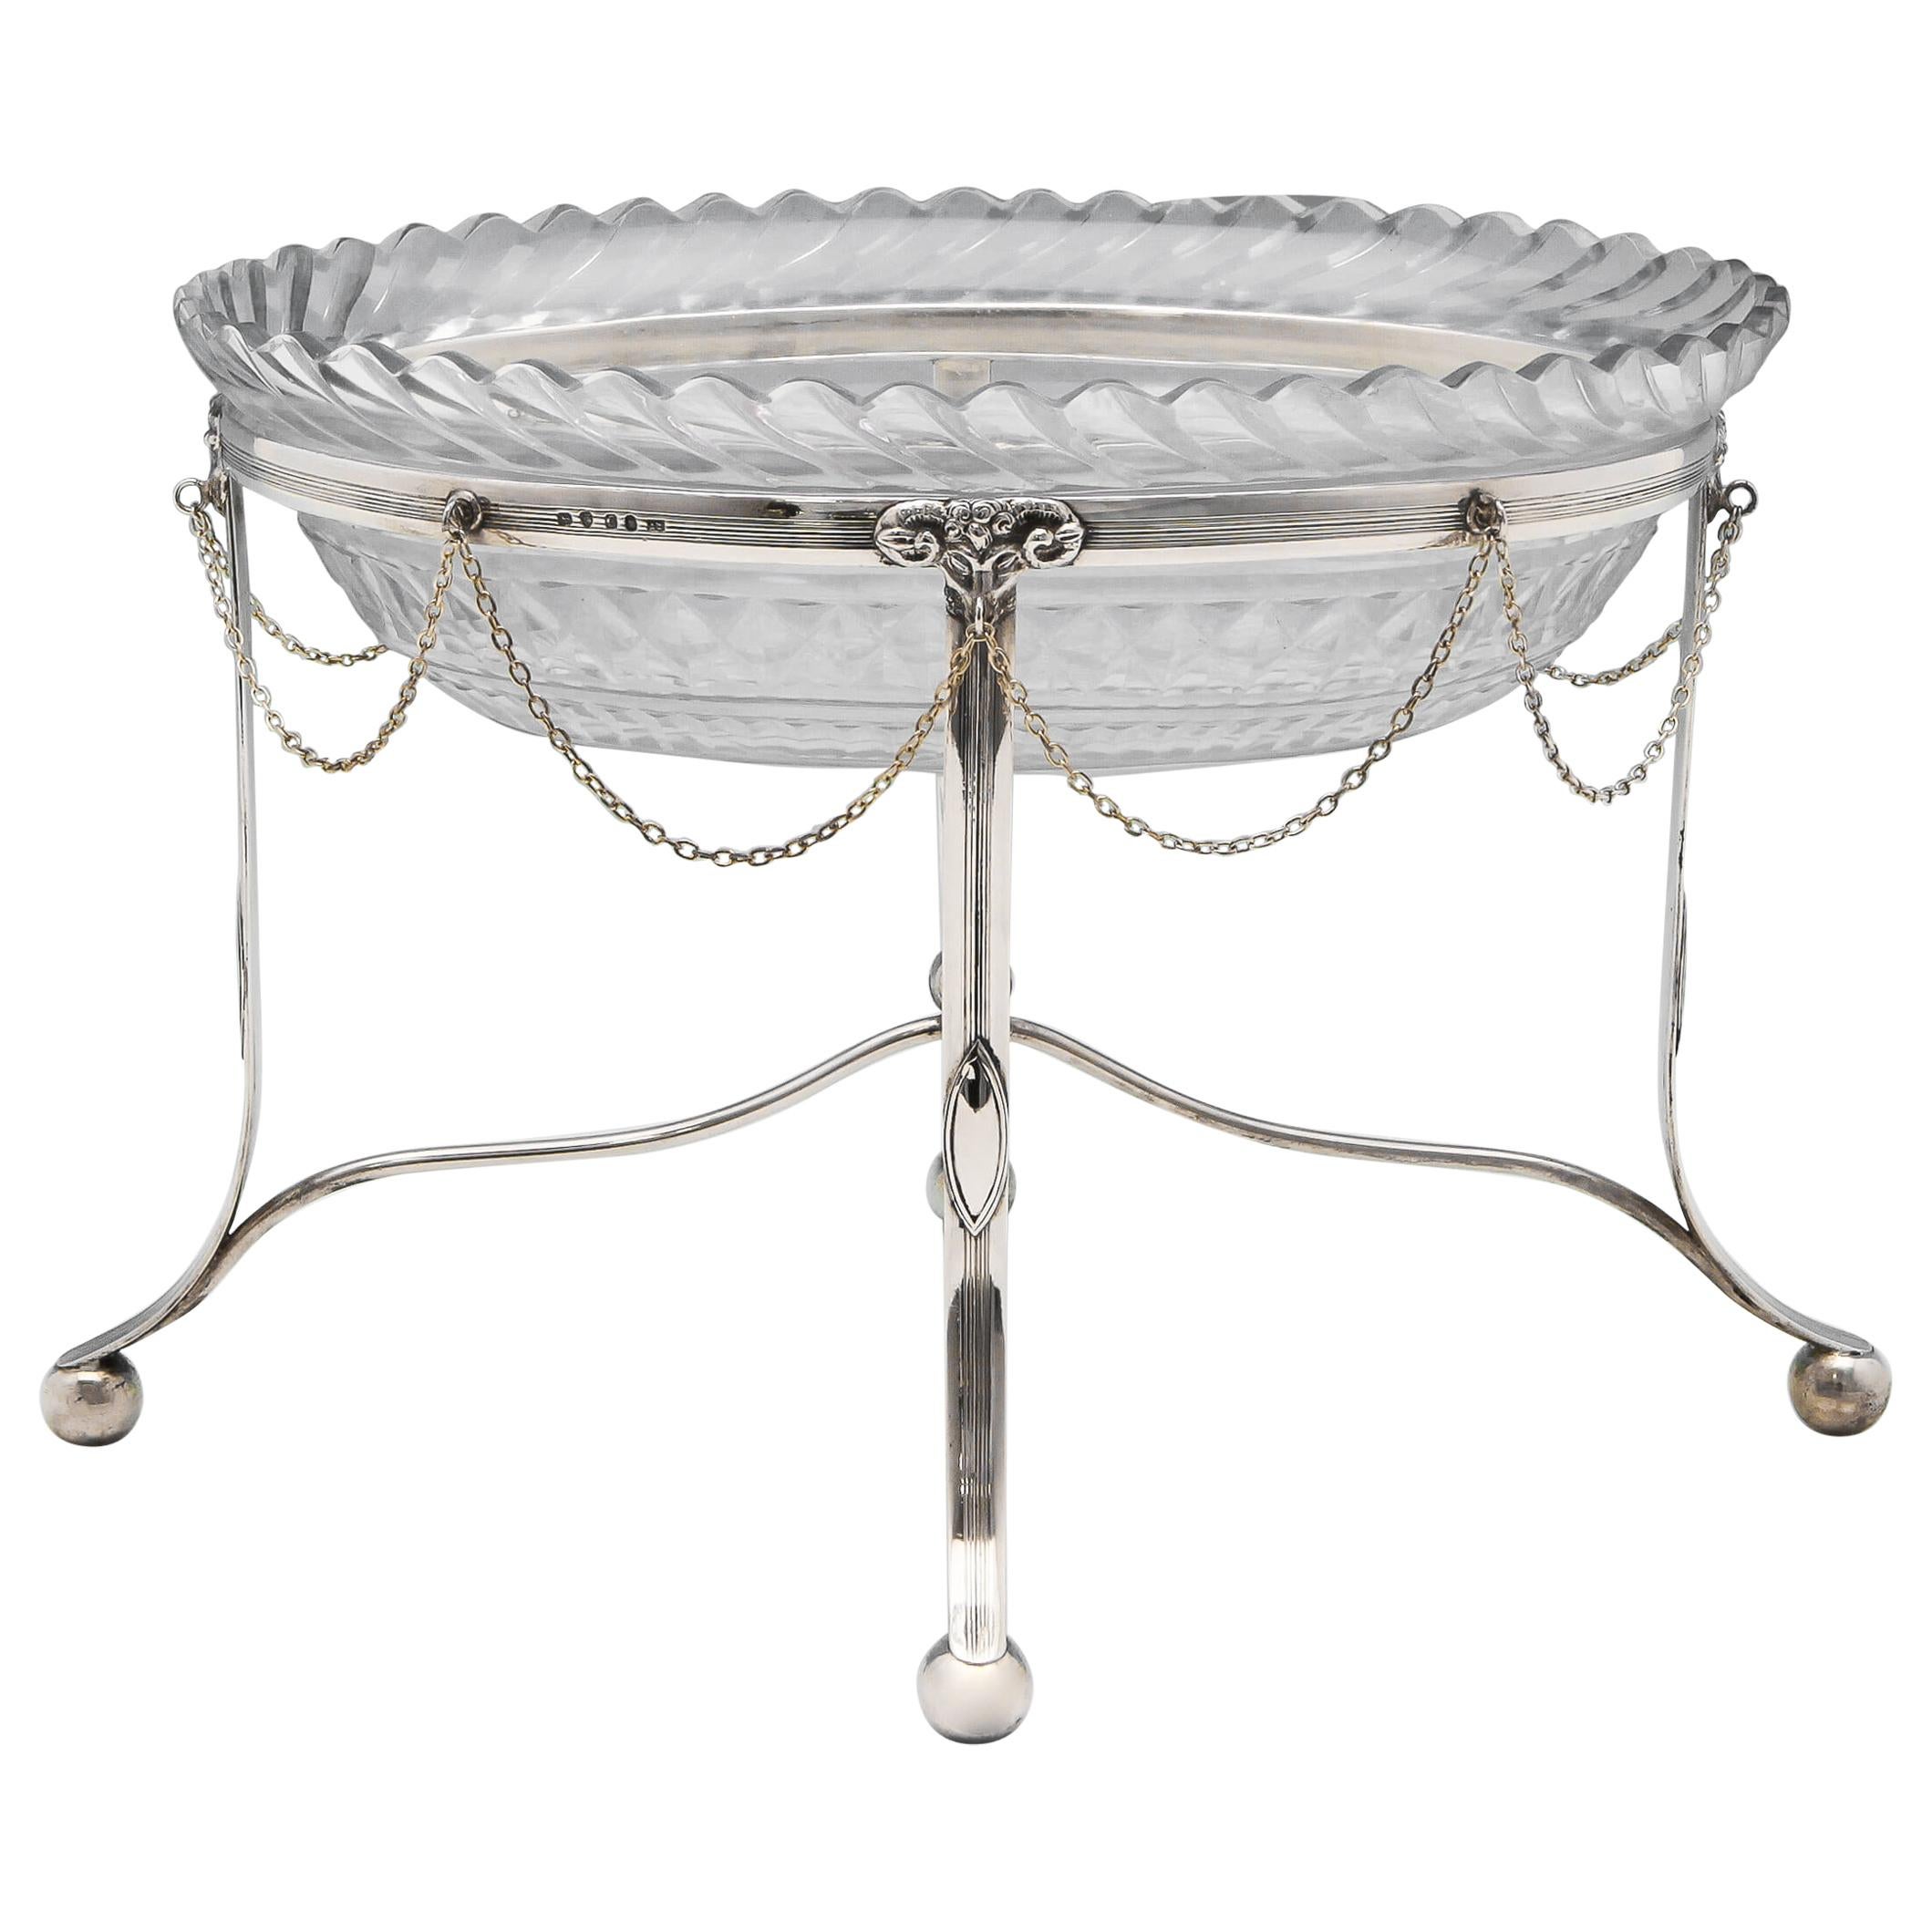 George III Neoclassical Adams Style Sterling Silver Centrepiece by John Touliet For Sale